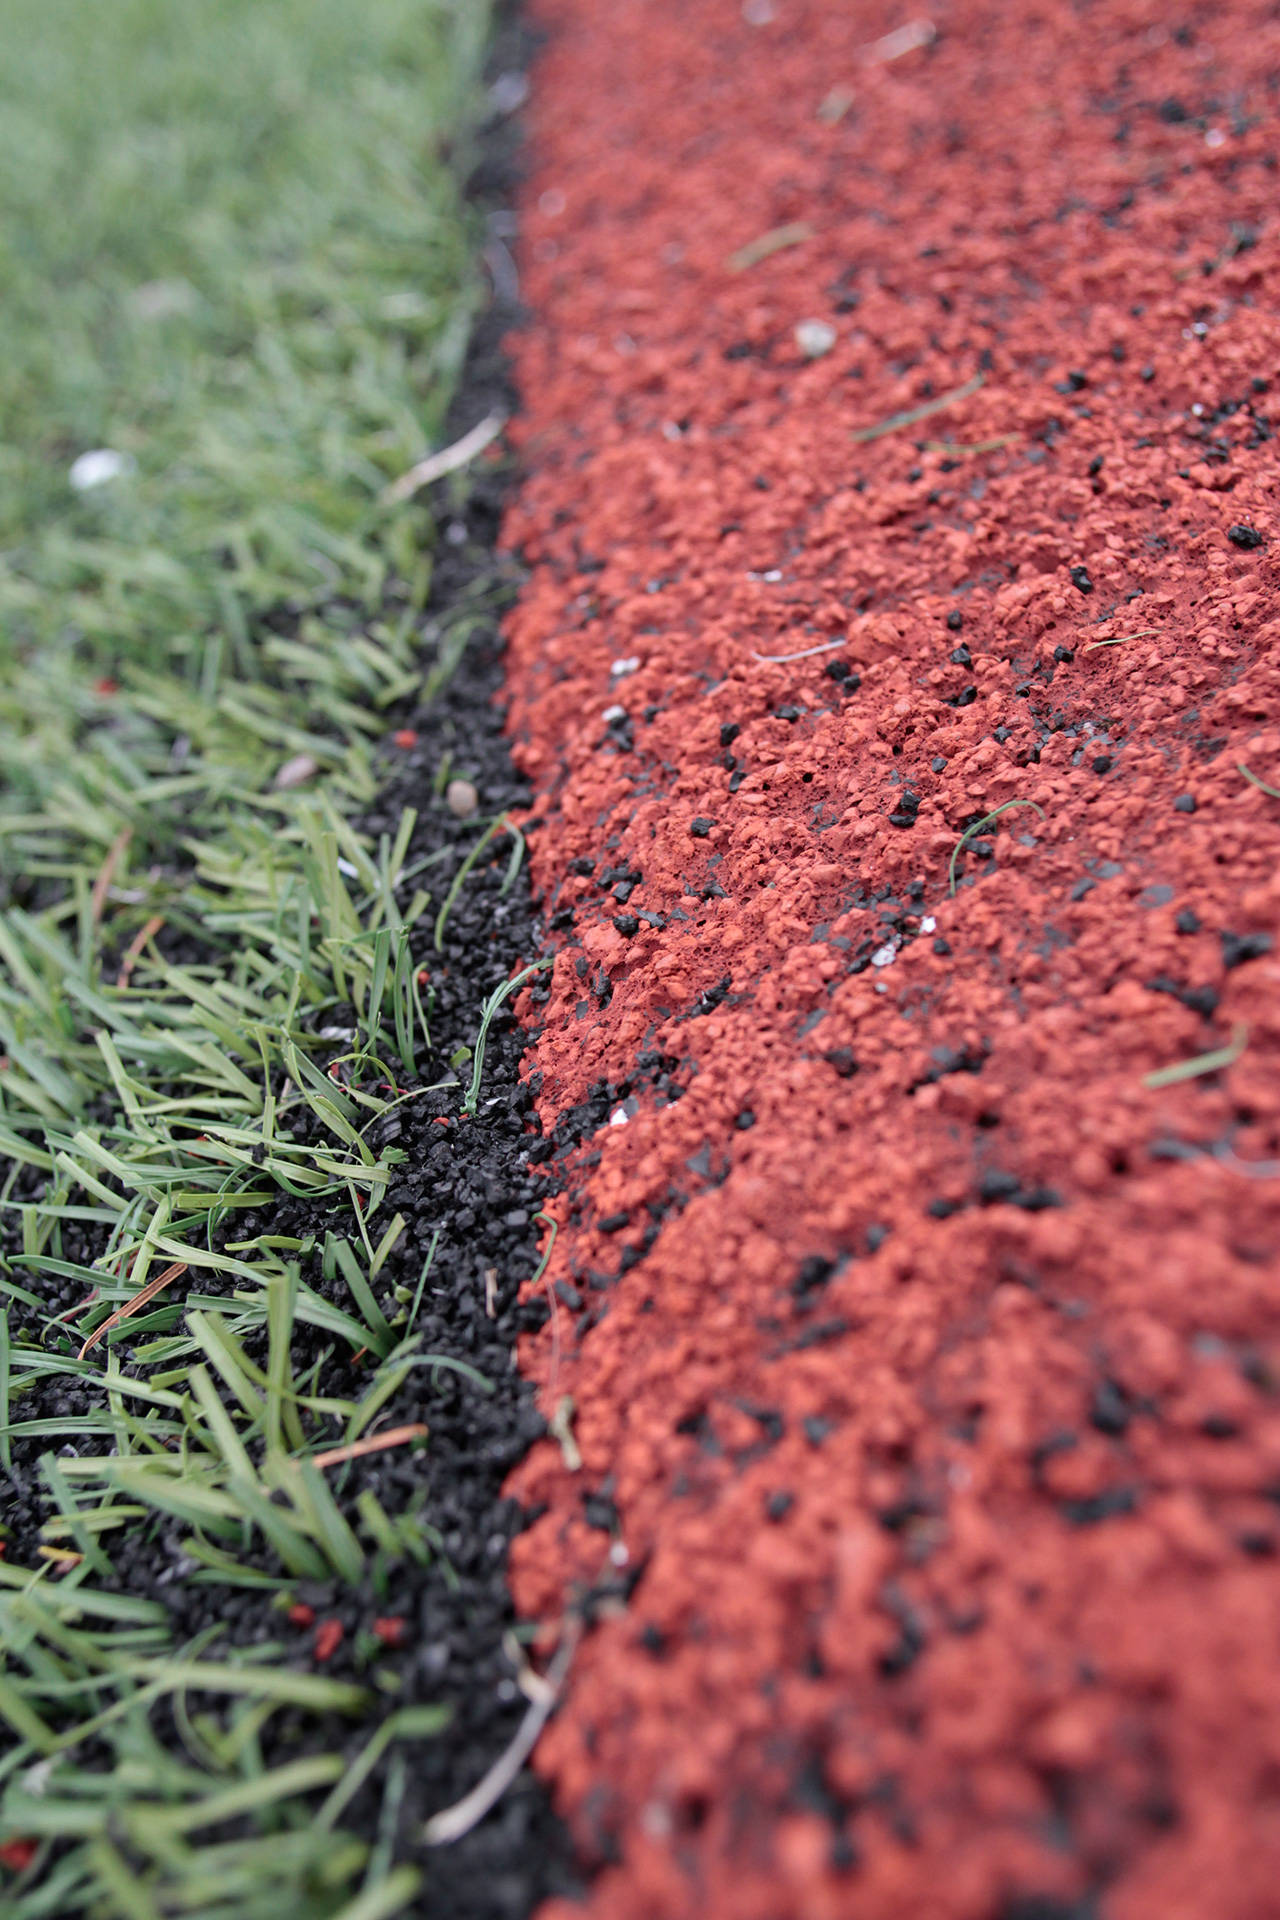 Health study on rubber turf comes under heavy scrutiny